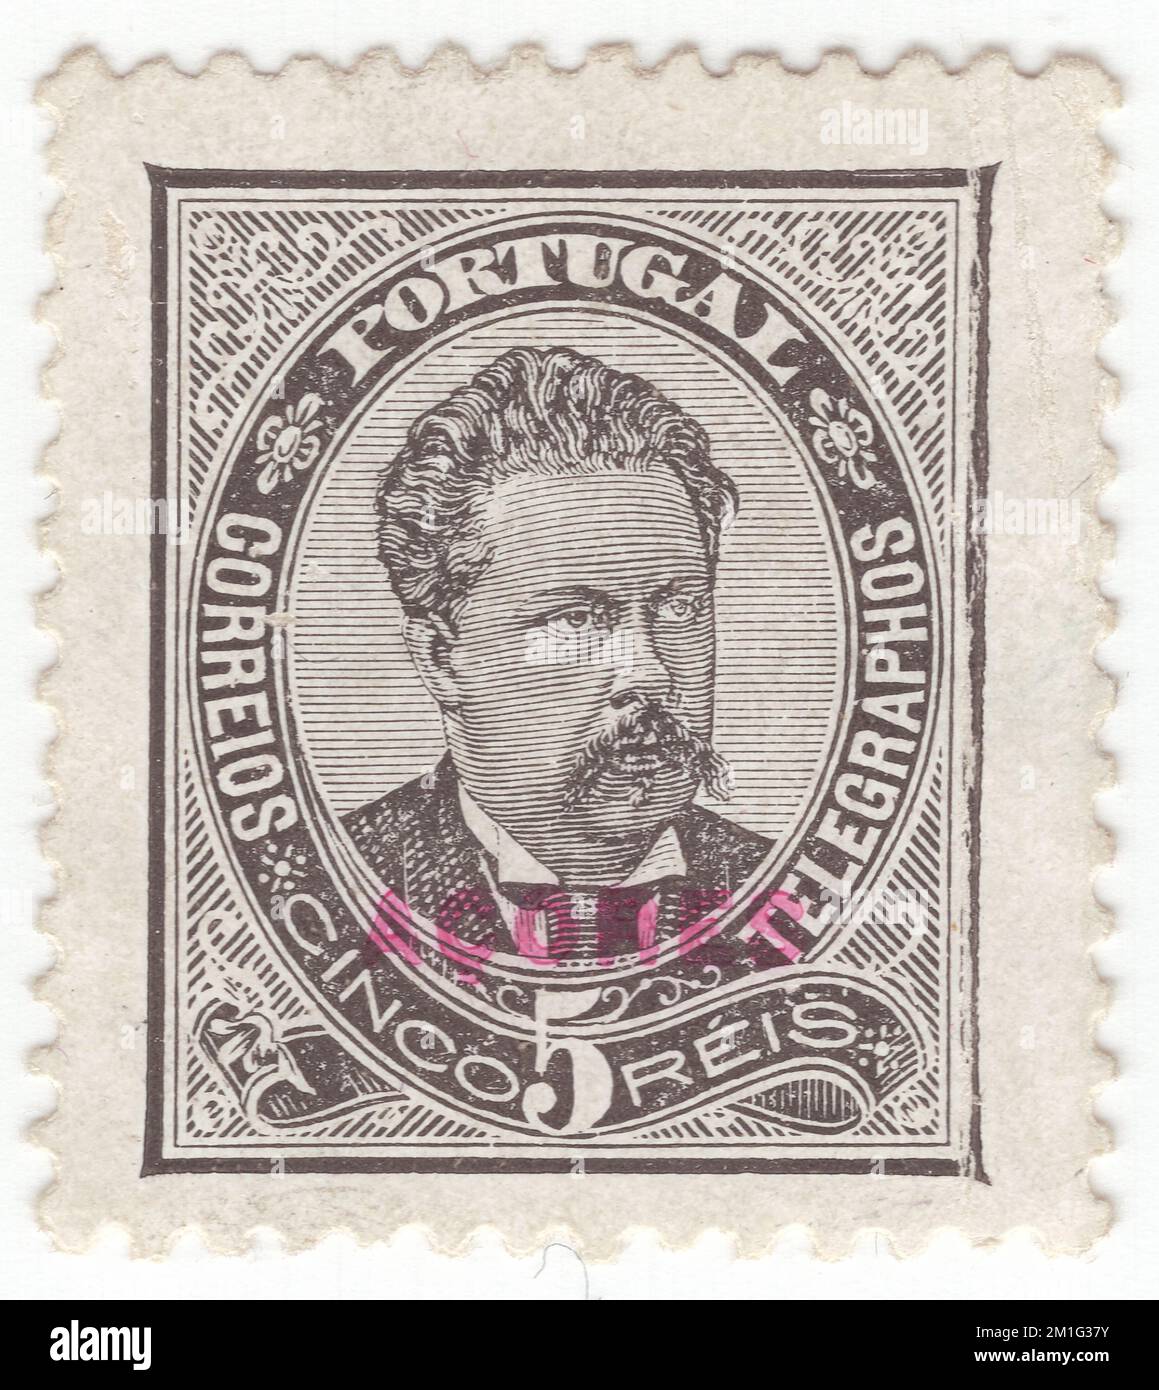 AZORES - 1882: An 5 reis slate postage stamp depicting portrait of King Luiz (Dom Luís I). Stamps of Portugal overprinted in red 'ACORES'. Dom Luís I (31 October 1838, in Lisbon – 19 October 1889, in Cascais), known as The Popular was a member of the ruling House of Braganza, and King of Portugal from 1861 to 1889. The second son of Queen Maria II and her consort, King Ferdinand, he acceded to the throne upon the death of his elder brother King Pedro V. Luís was a cultured man who wrote vernacular poetry, but had no distinguishing gifts in the politics Stock Photo